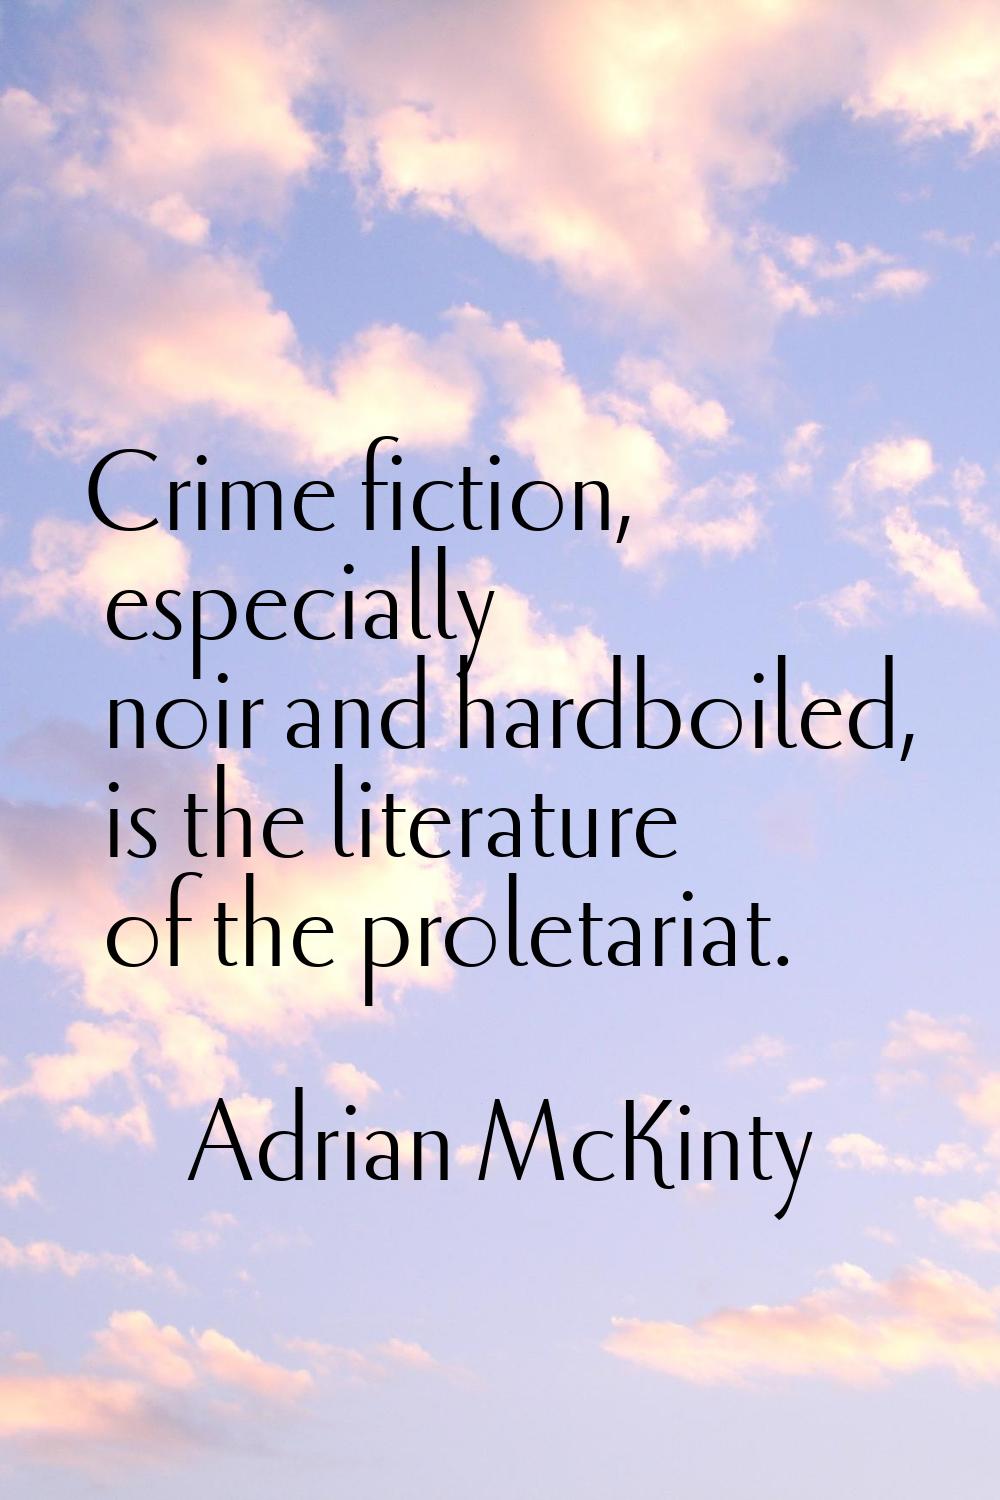 Crime fiction, especially noir and hardboiled, is the literature of the proletariat.